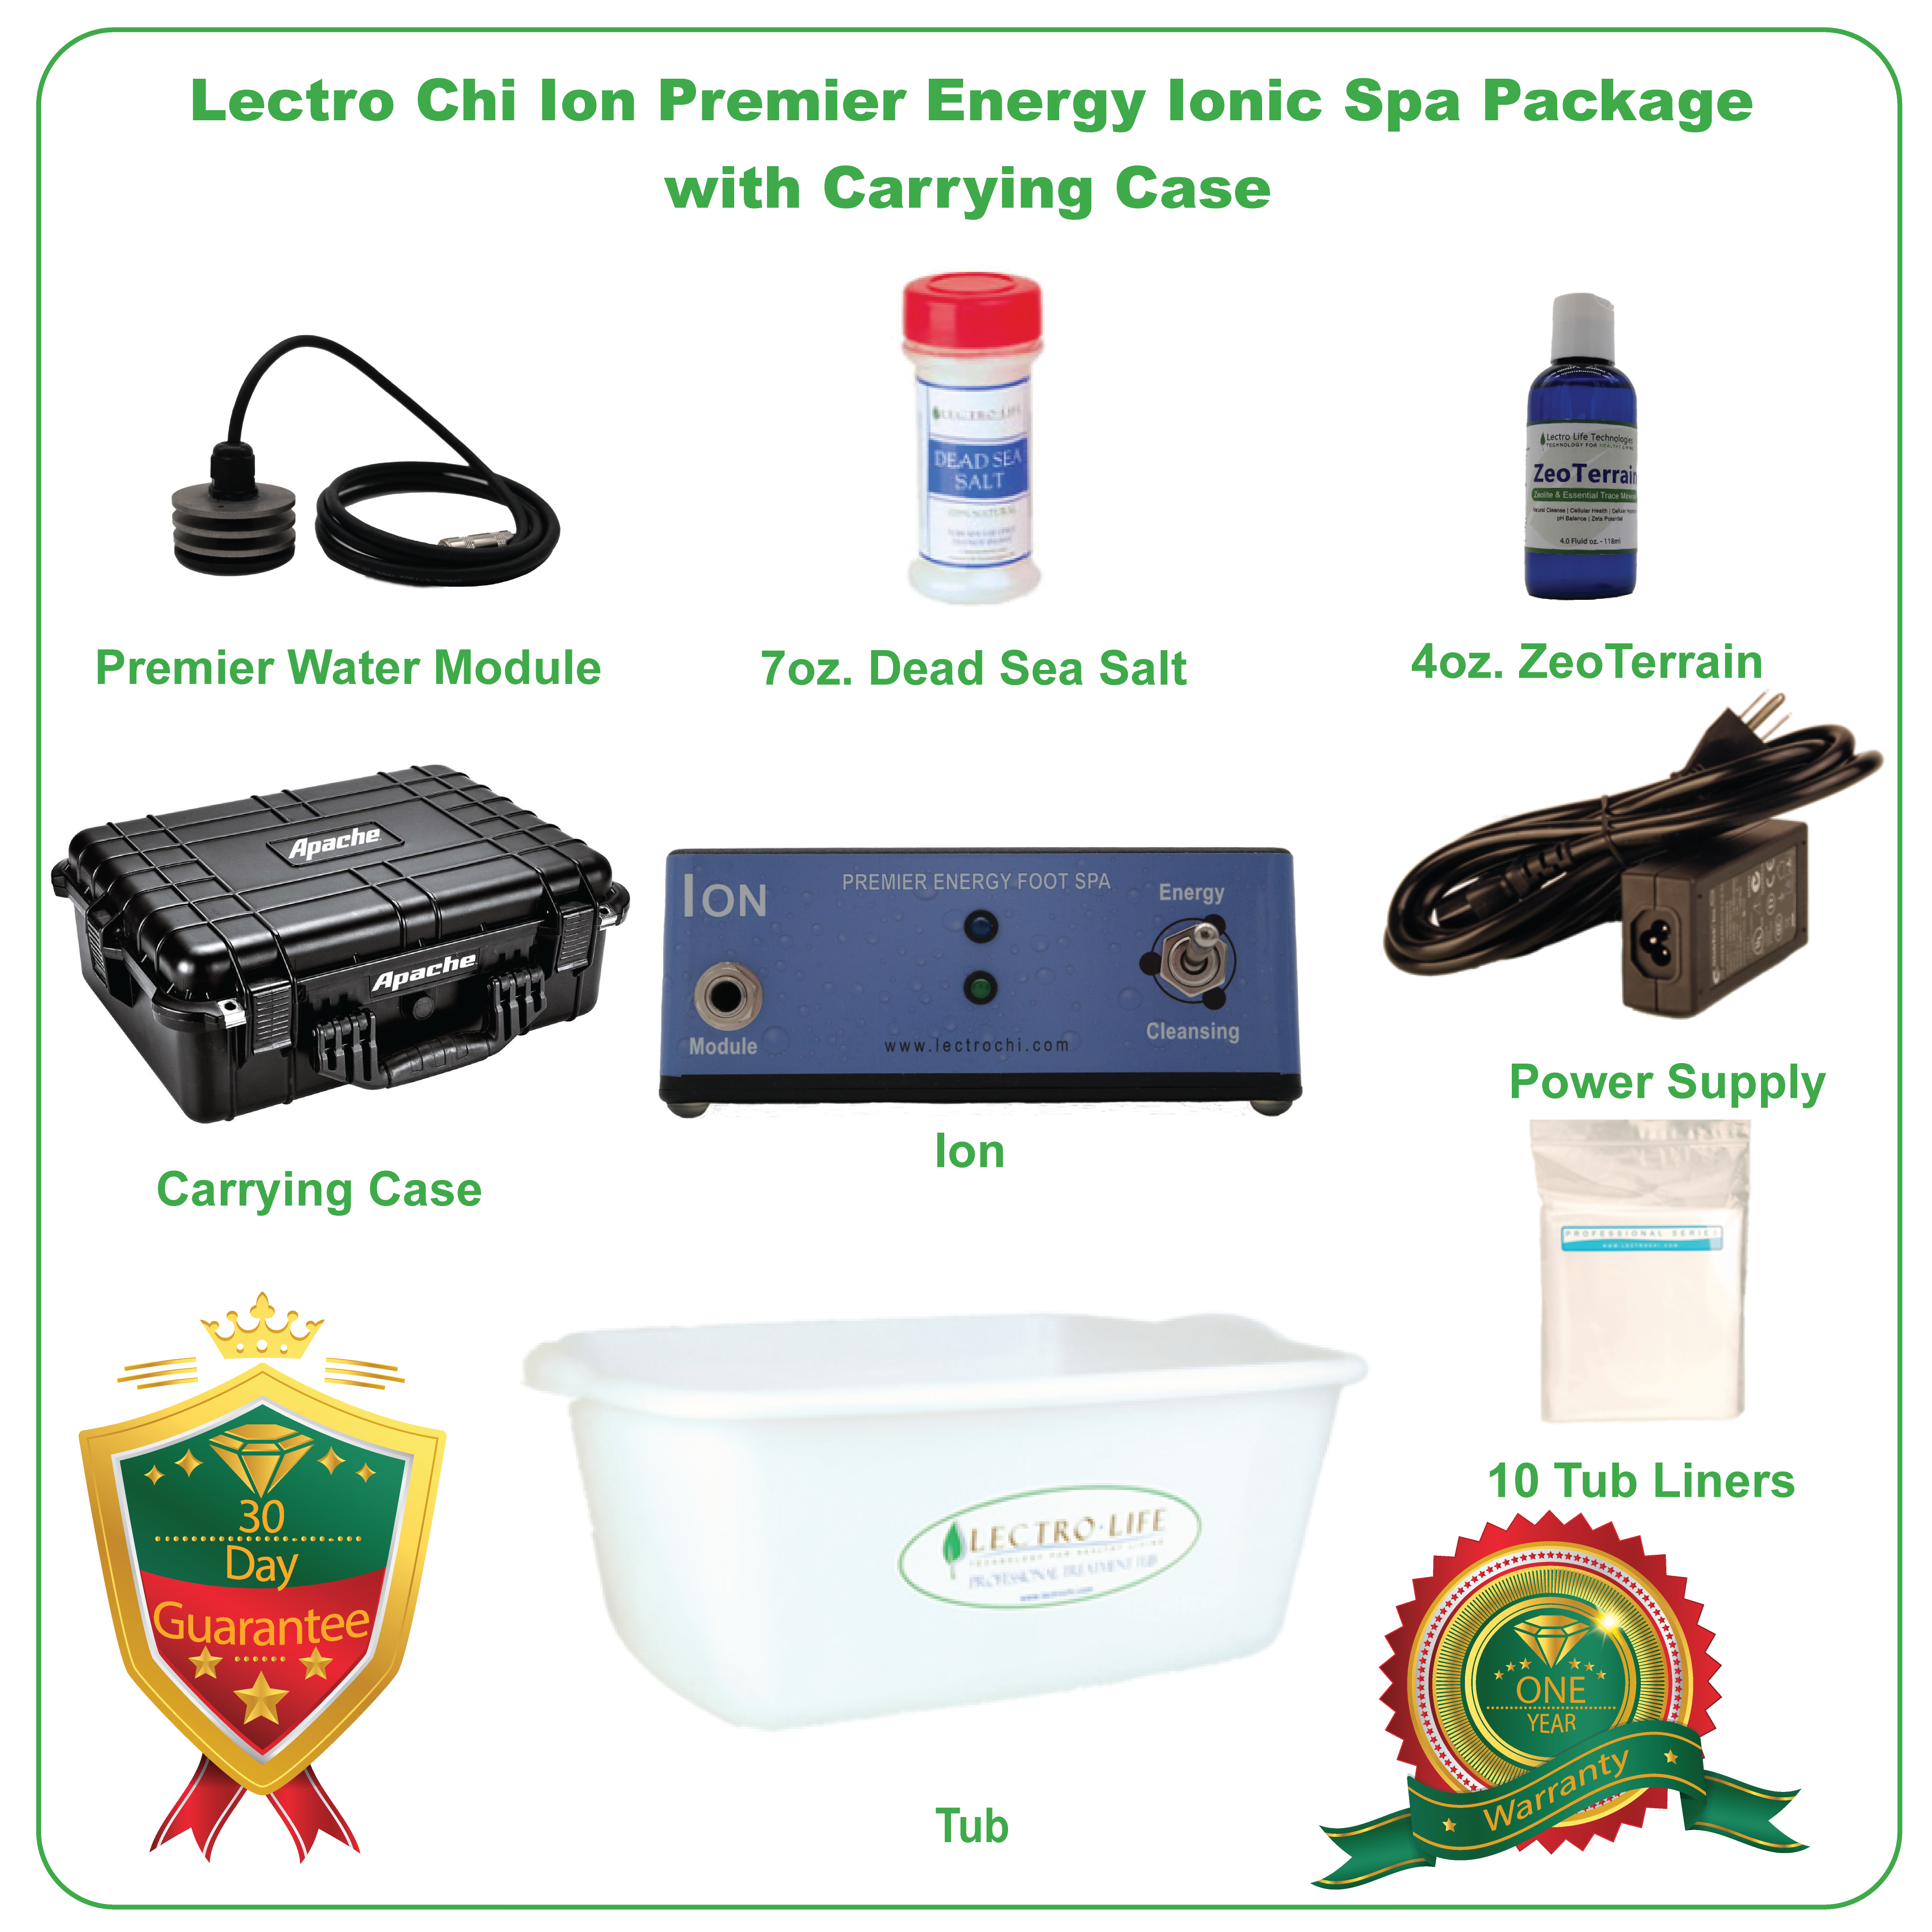 Lectro Chi Ion Premier Energy Ionic Spa Package with Carrying Case